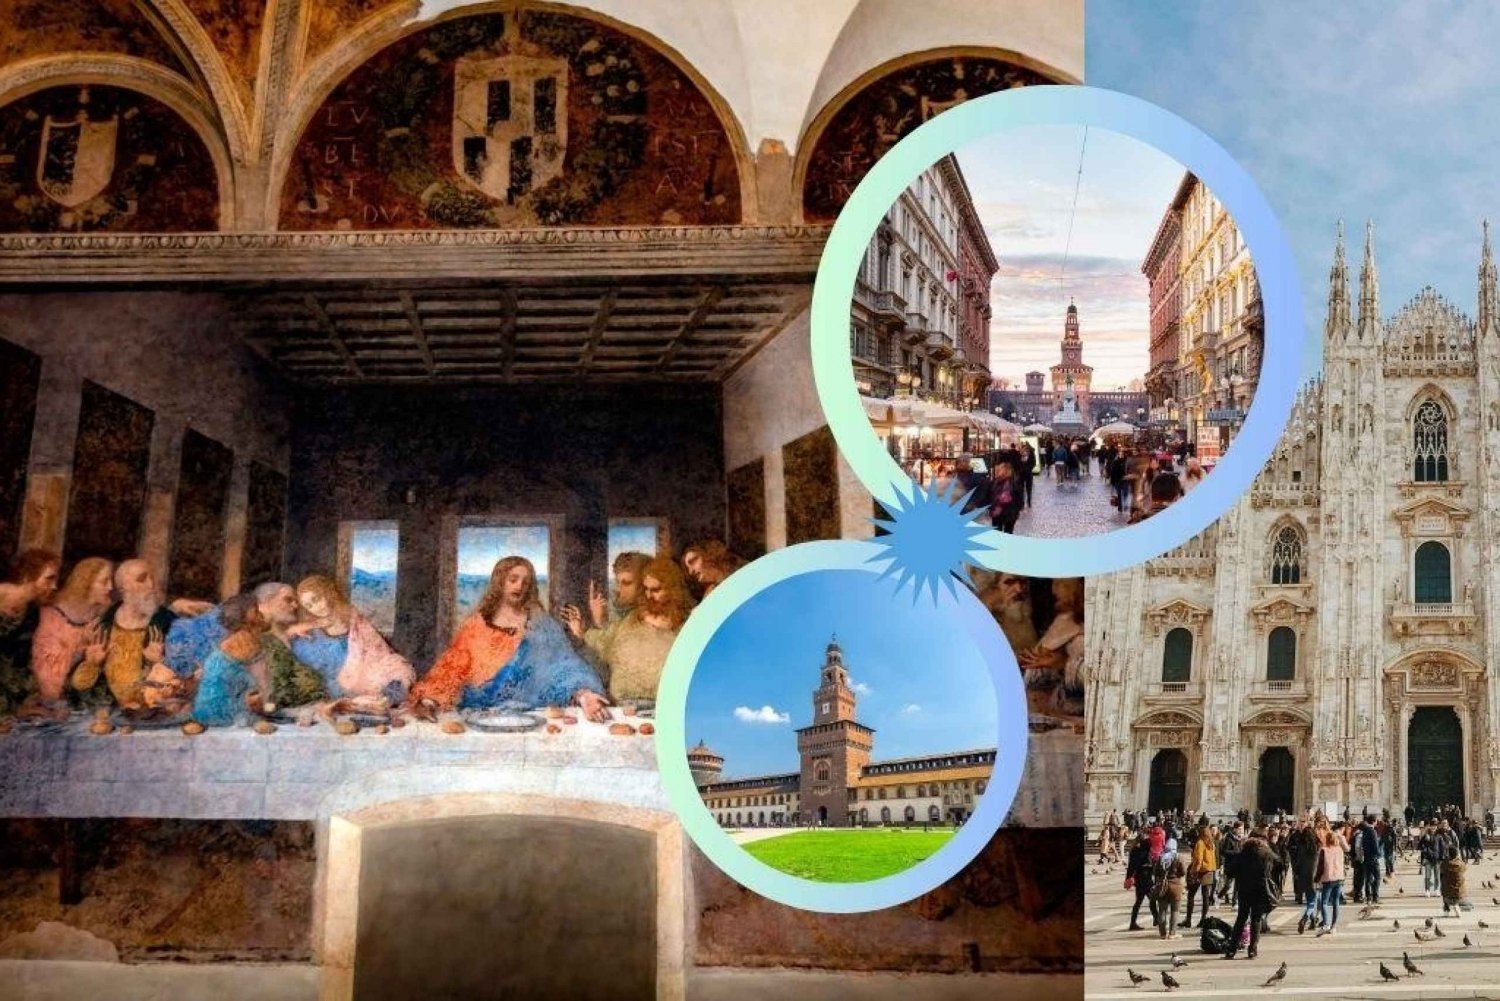 Milan: The Last Supper and City Walking Tour